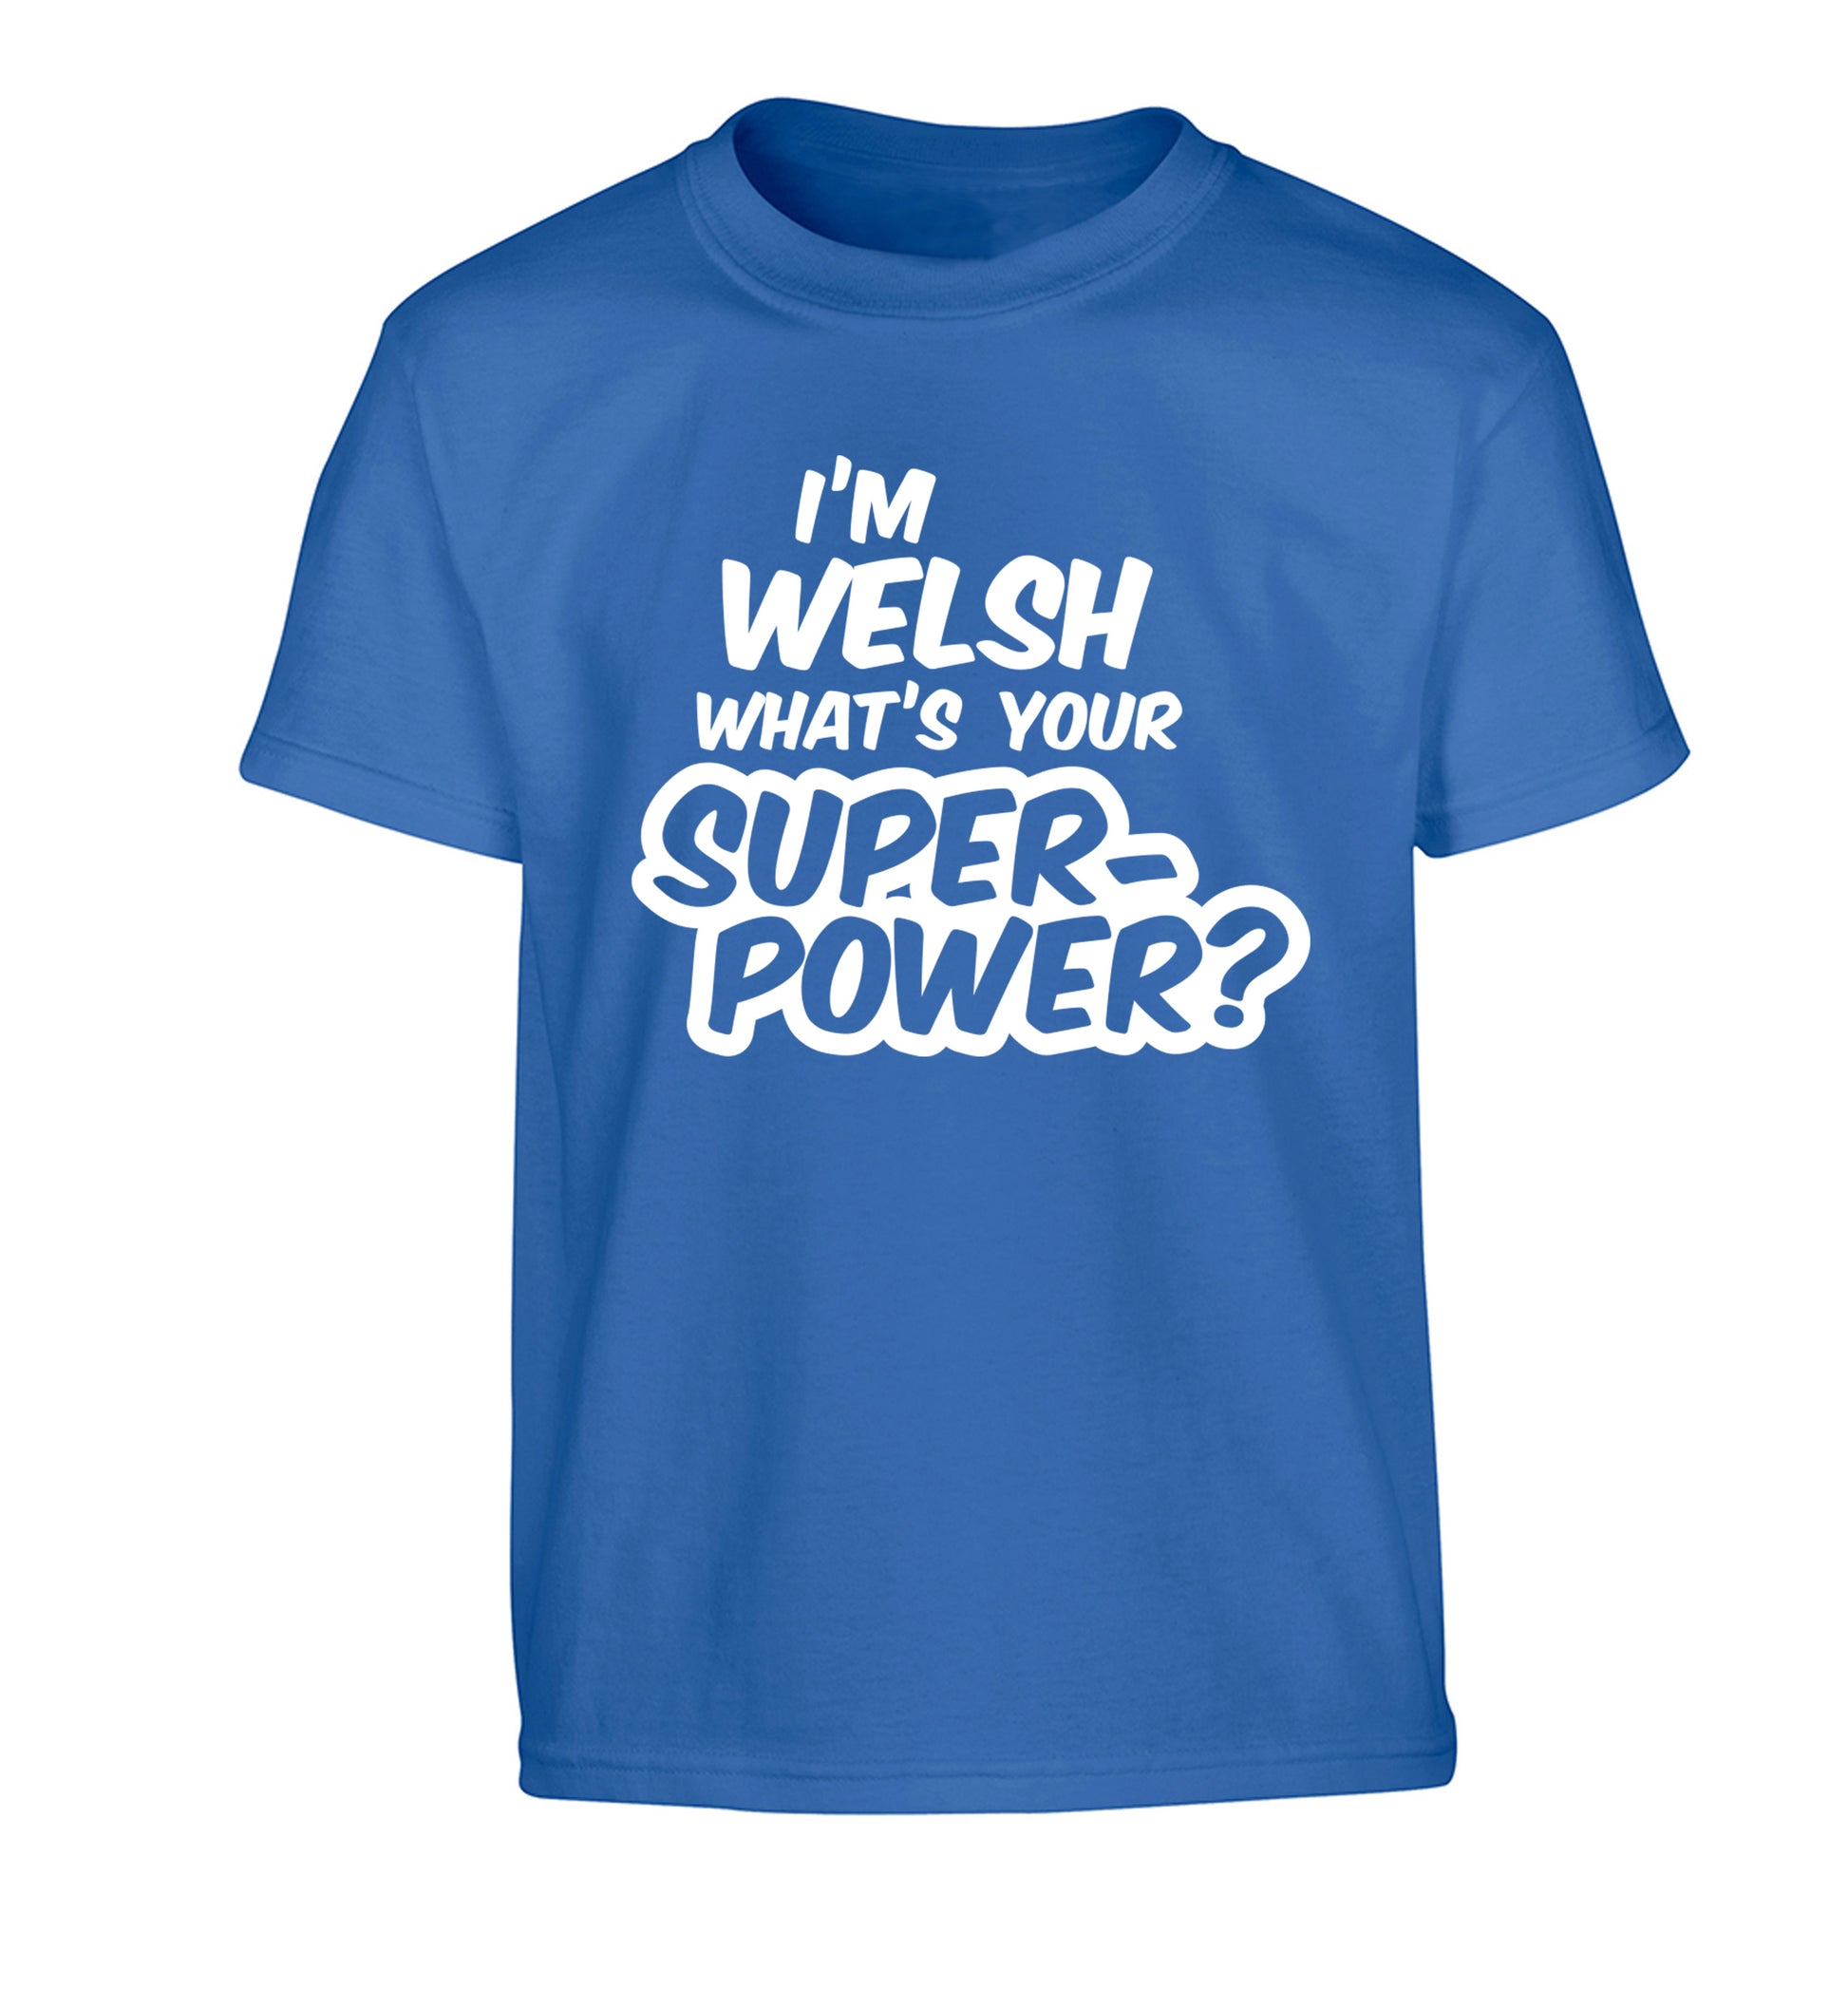 I'm Welsh what's your superpower? Children's blue Tshirt 12-13 Years